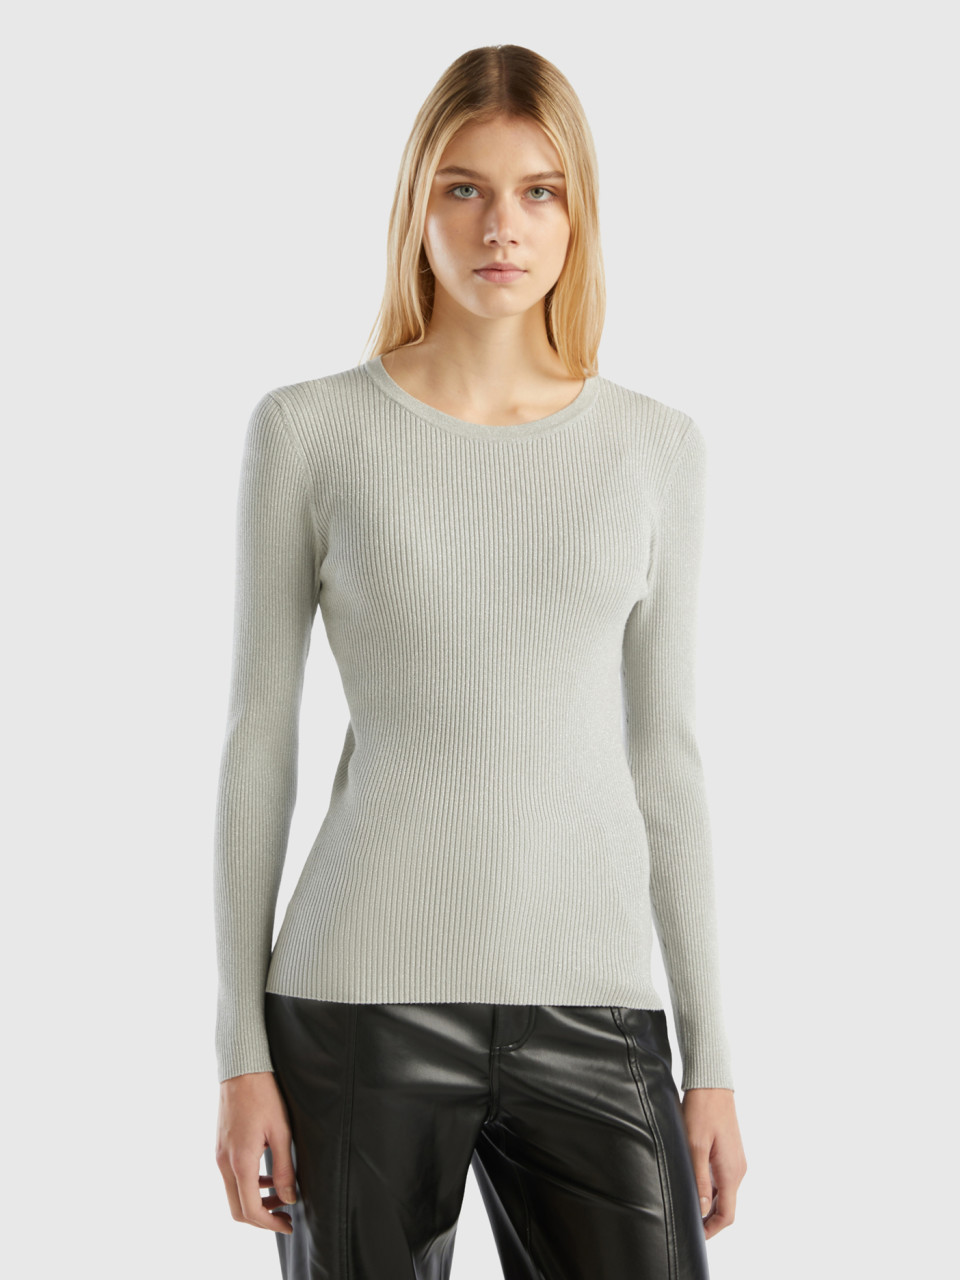 Benetton, Ribbed Sweater With Lurex, Light Gray, Women